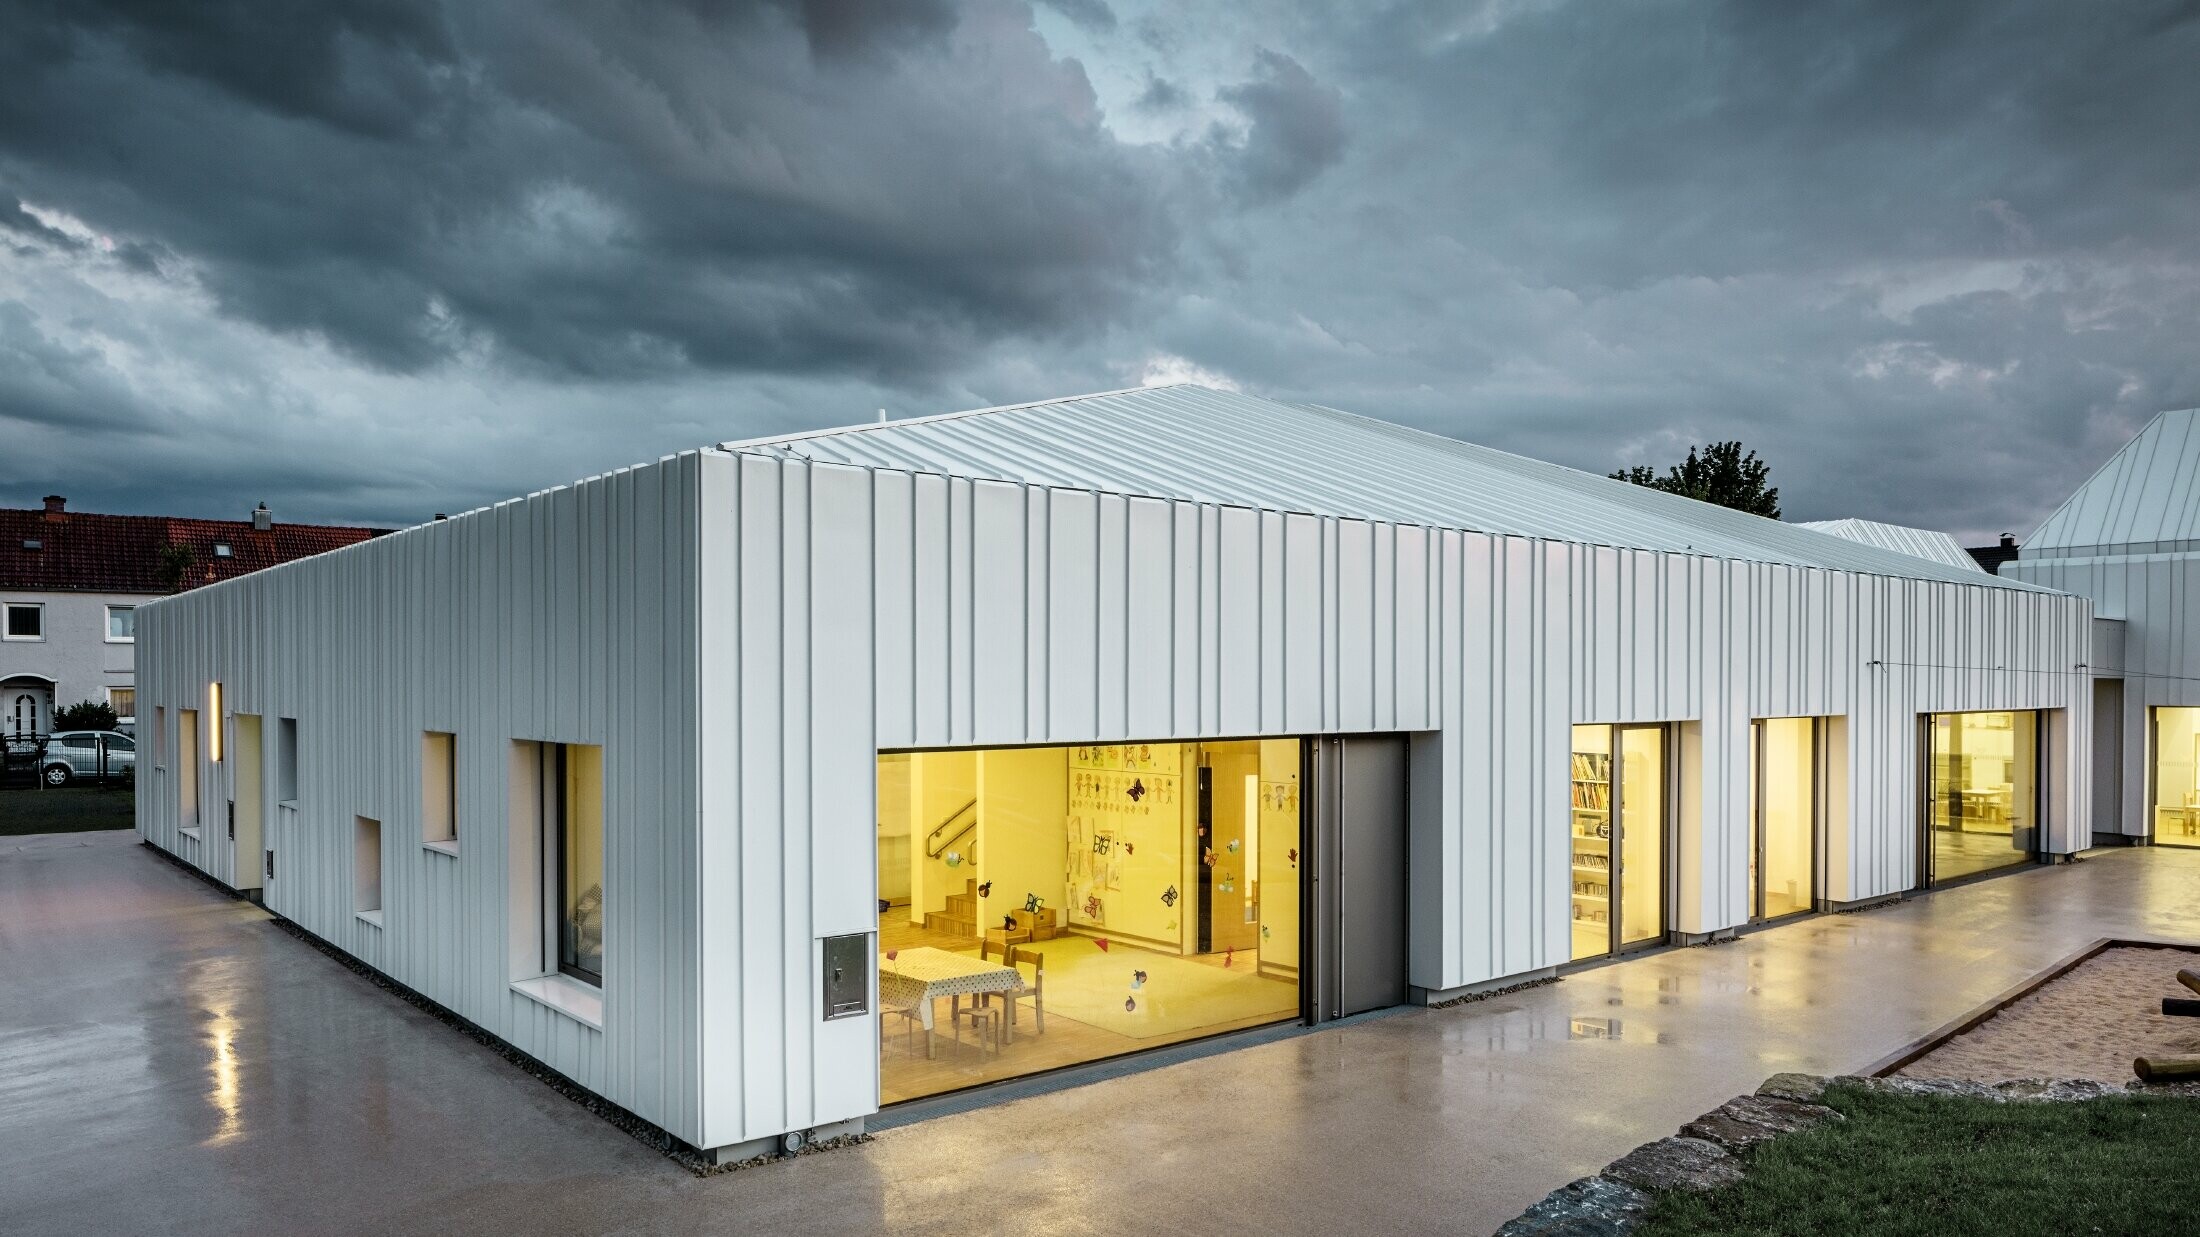 Day nursery in Niederwerrn with PREFALZ roof and façade in pure white with different widths of panels photographed at dusk and in a cloudy atmosphere